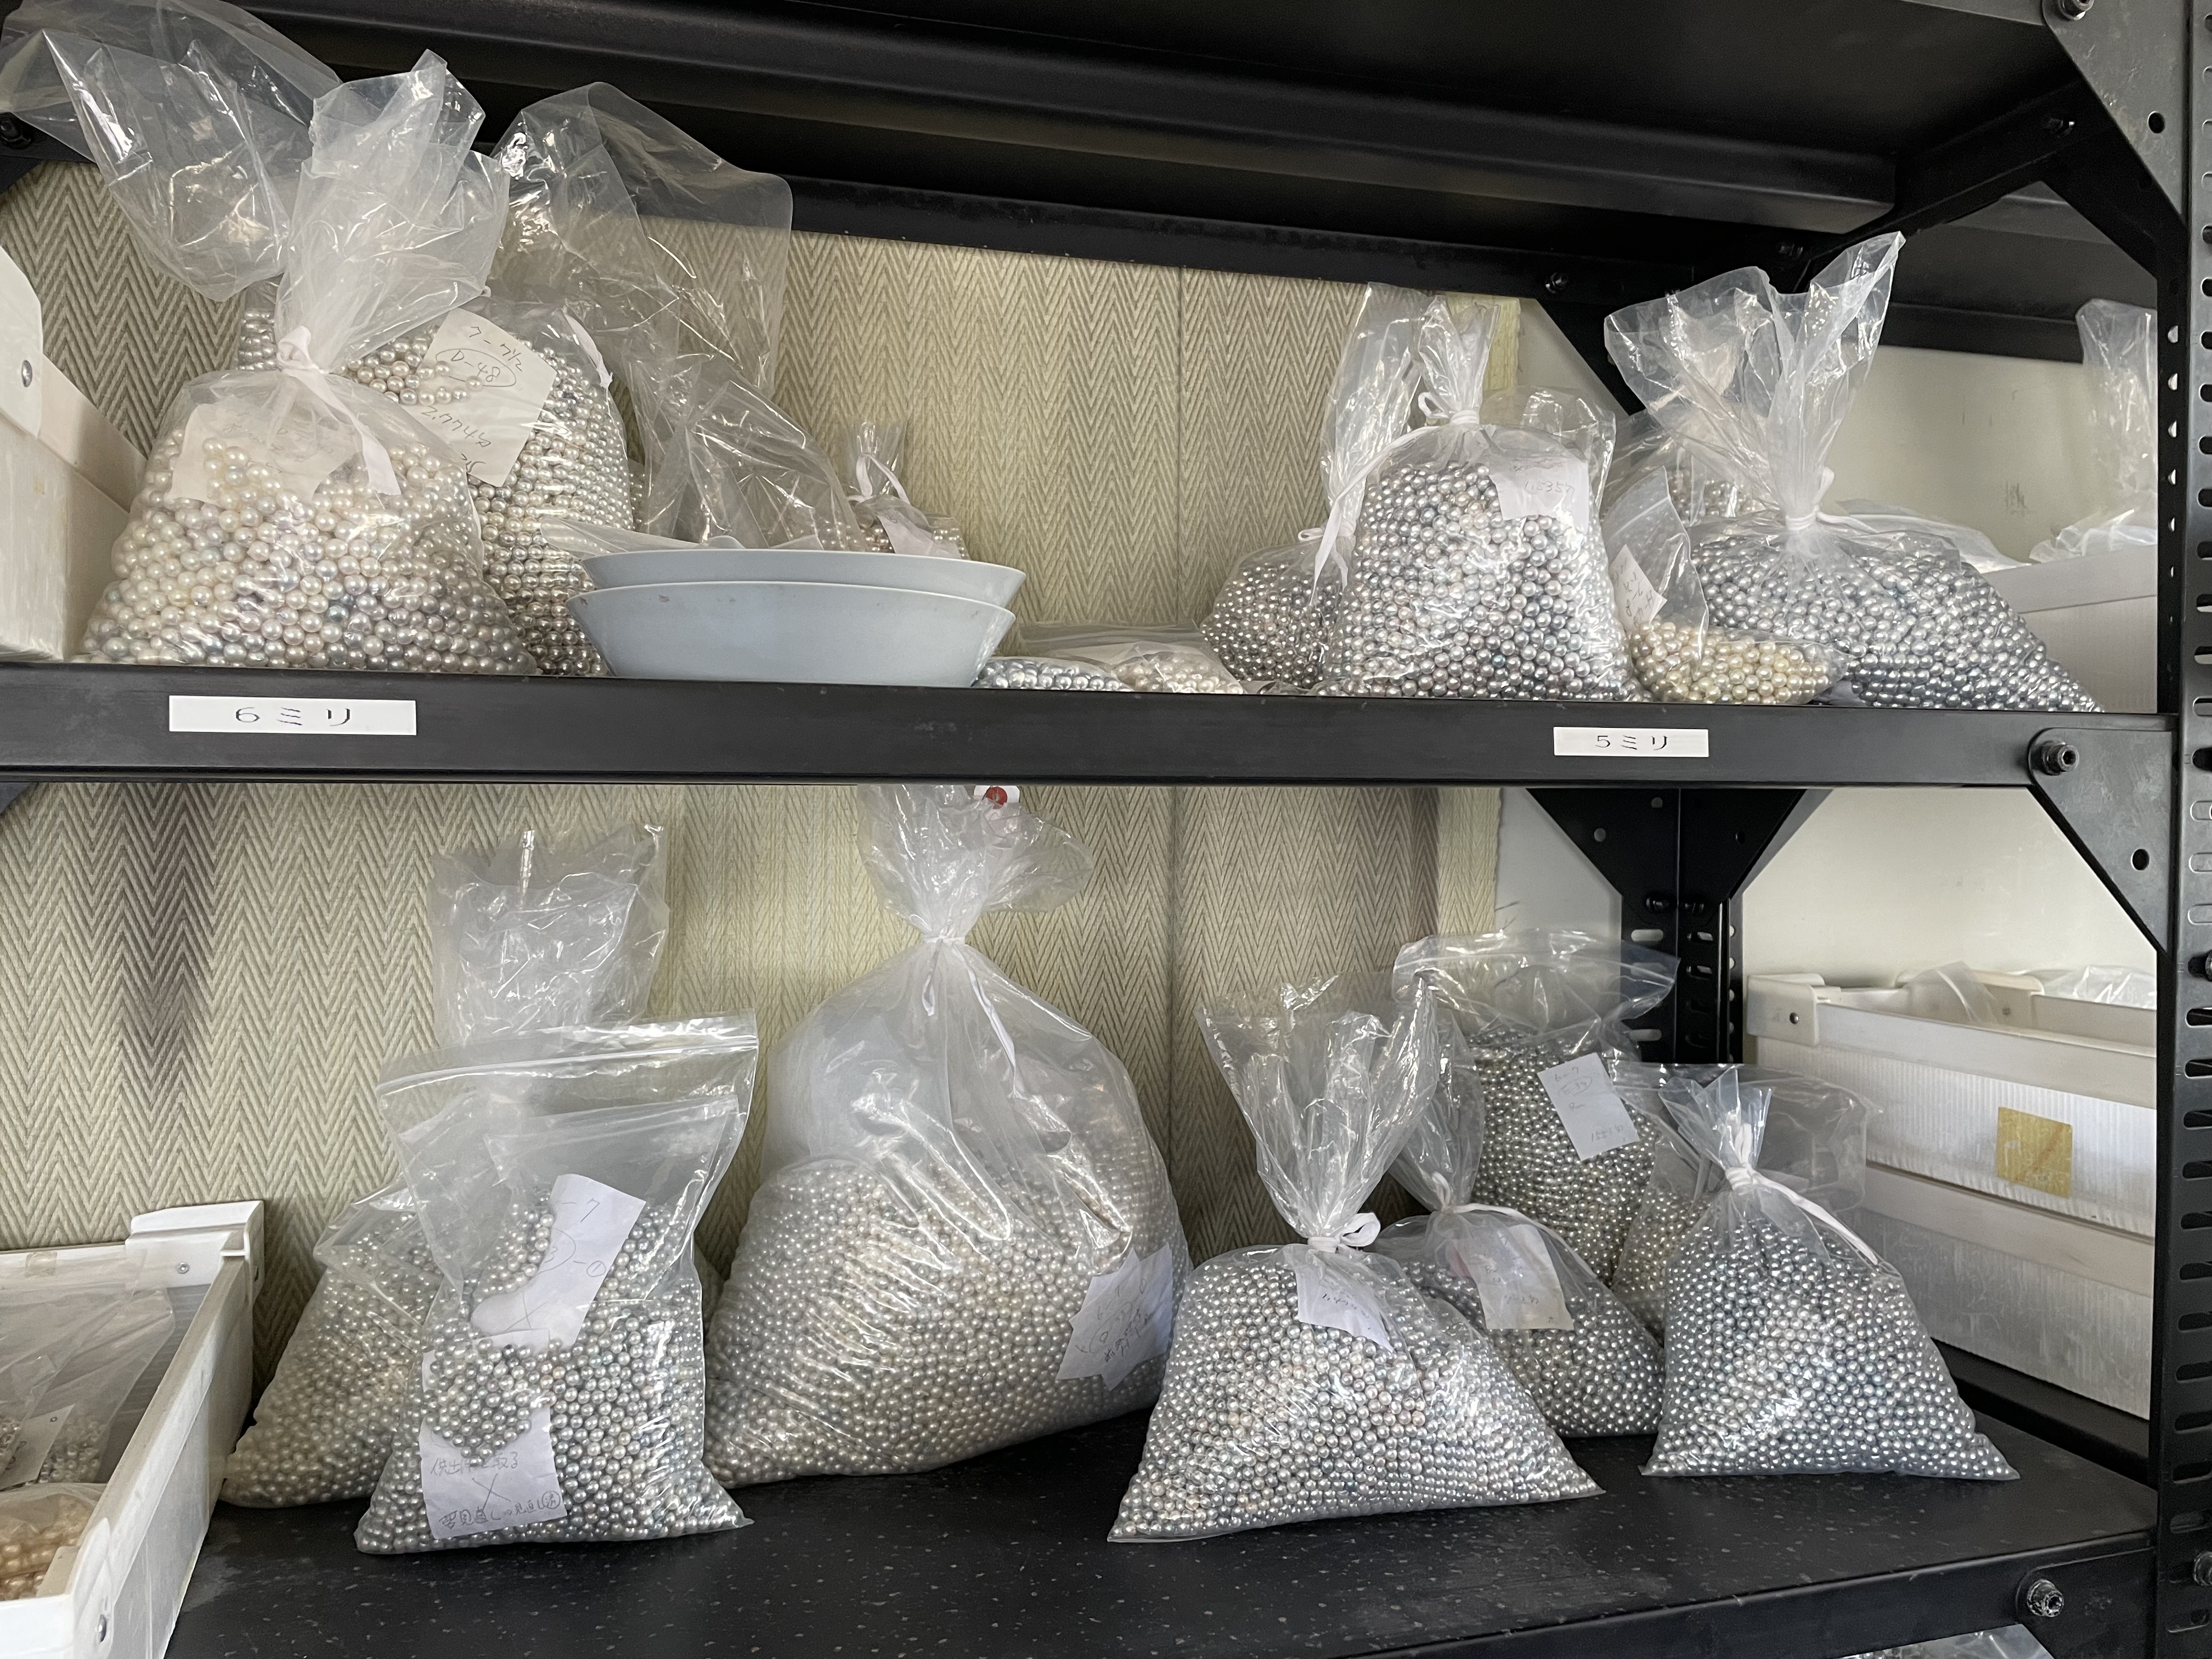 bags of pearls in their natural state waiting to be sorted and processed